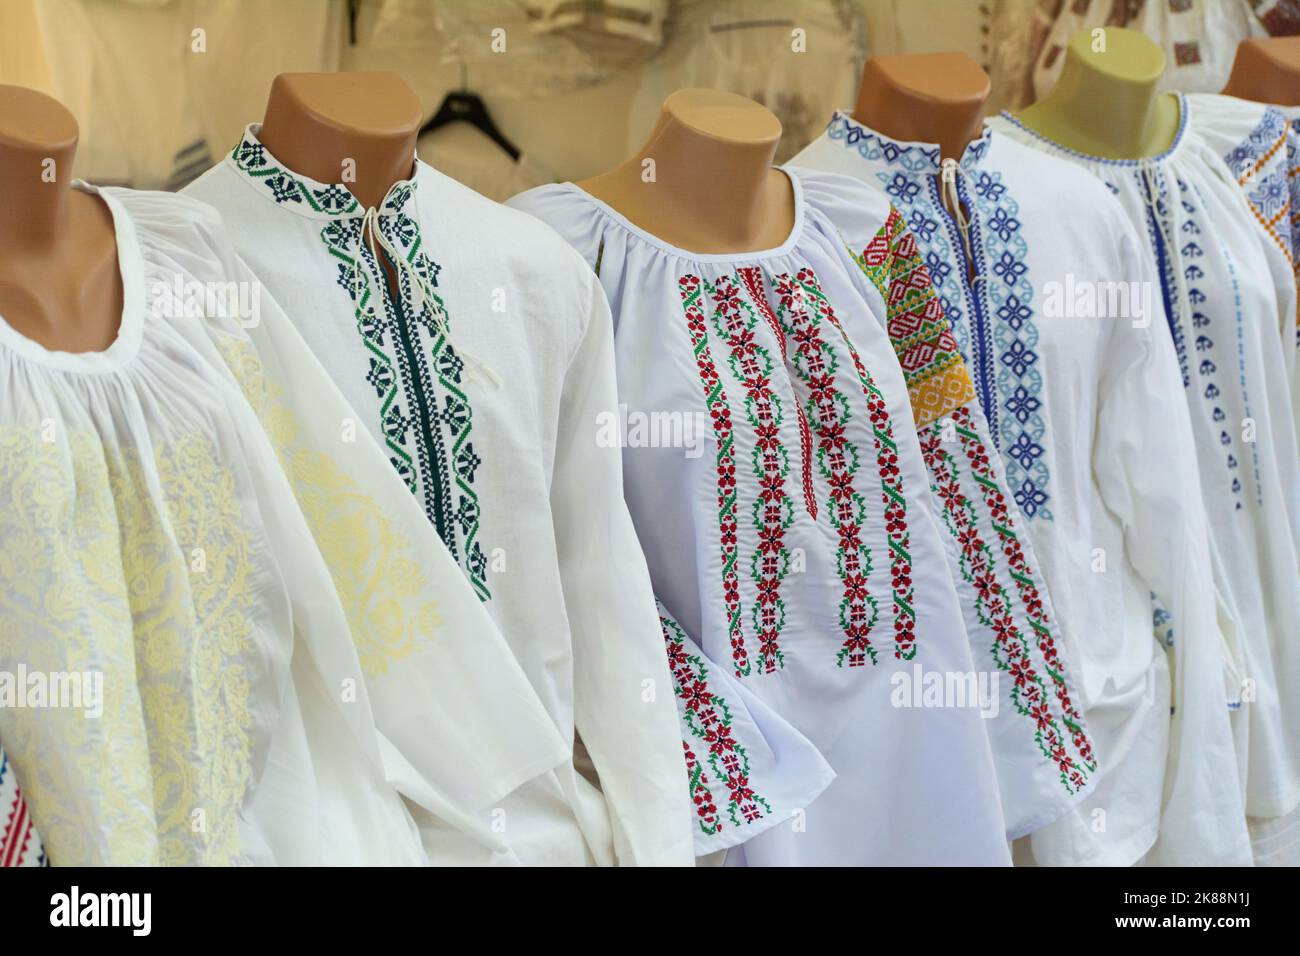 Moldovan embroideries. Men's and women's Moldovan embroidered shirts at the fair. Balkan embroidered national traditional costume clothes Stock Photo